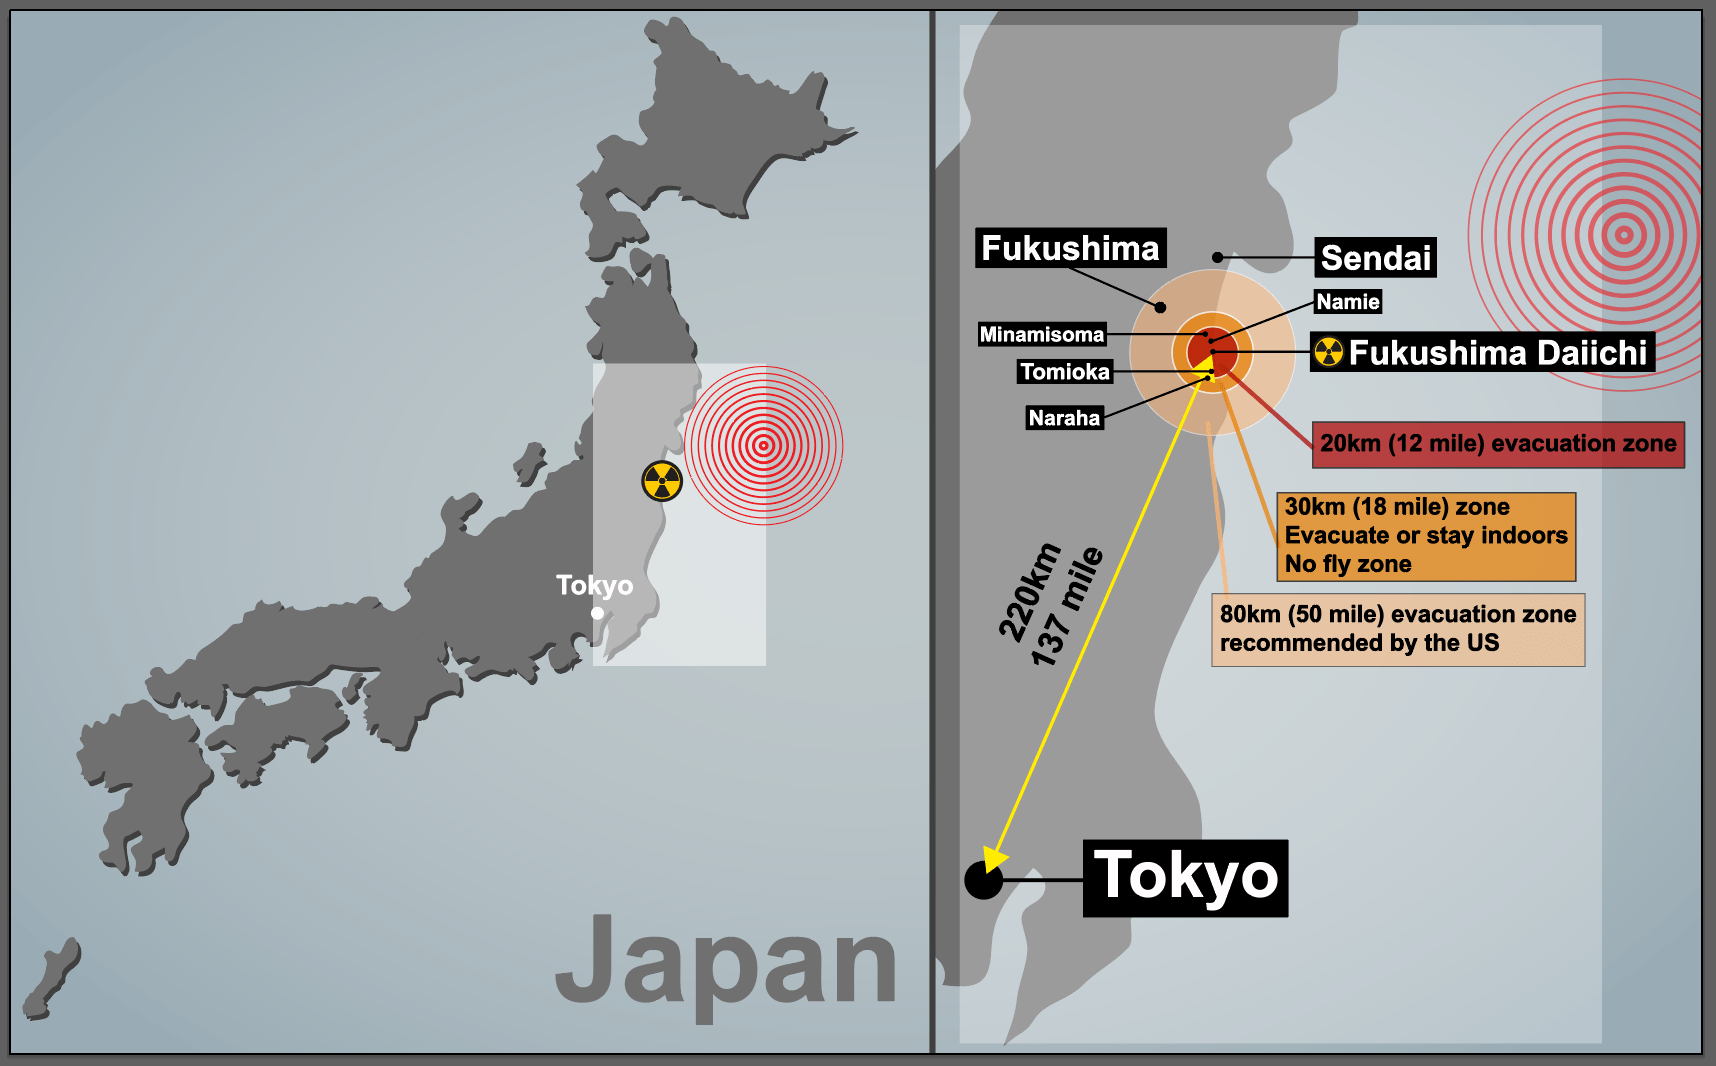 japan earthquake 2011 geography case study